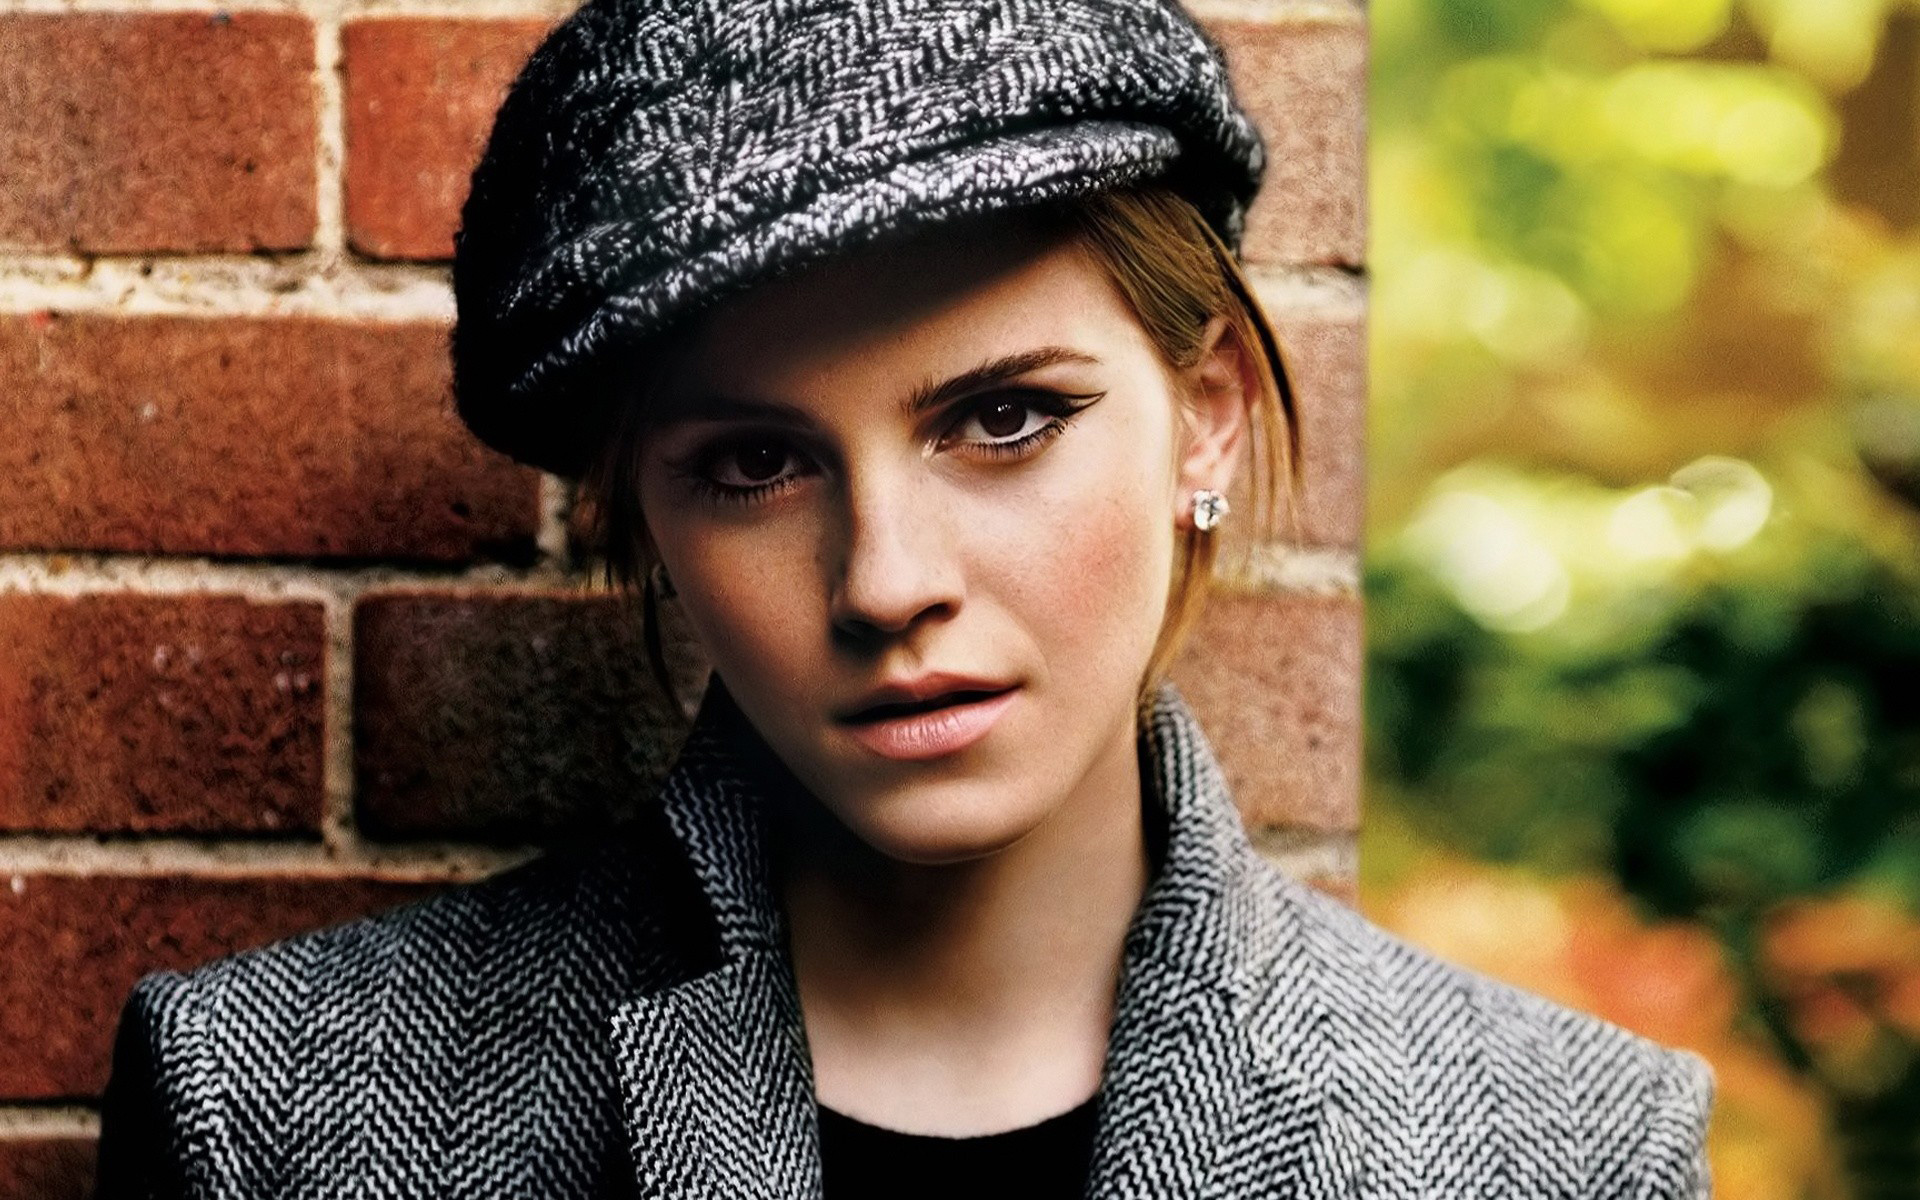 hd emma watson nice court look still with cap free download computer background pics